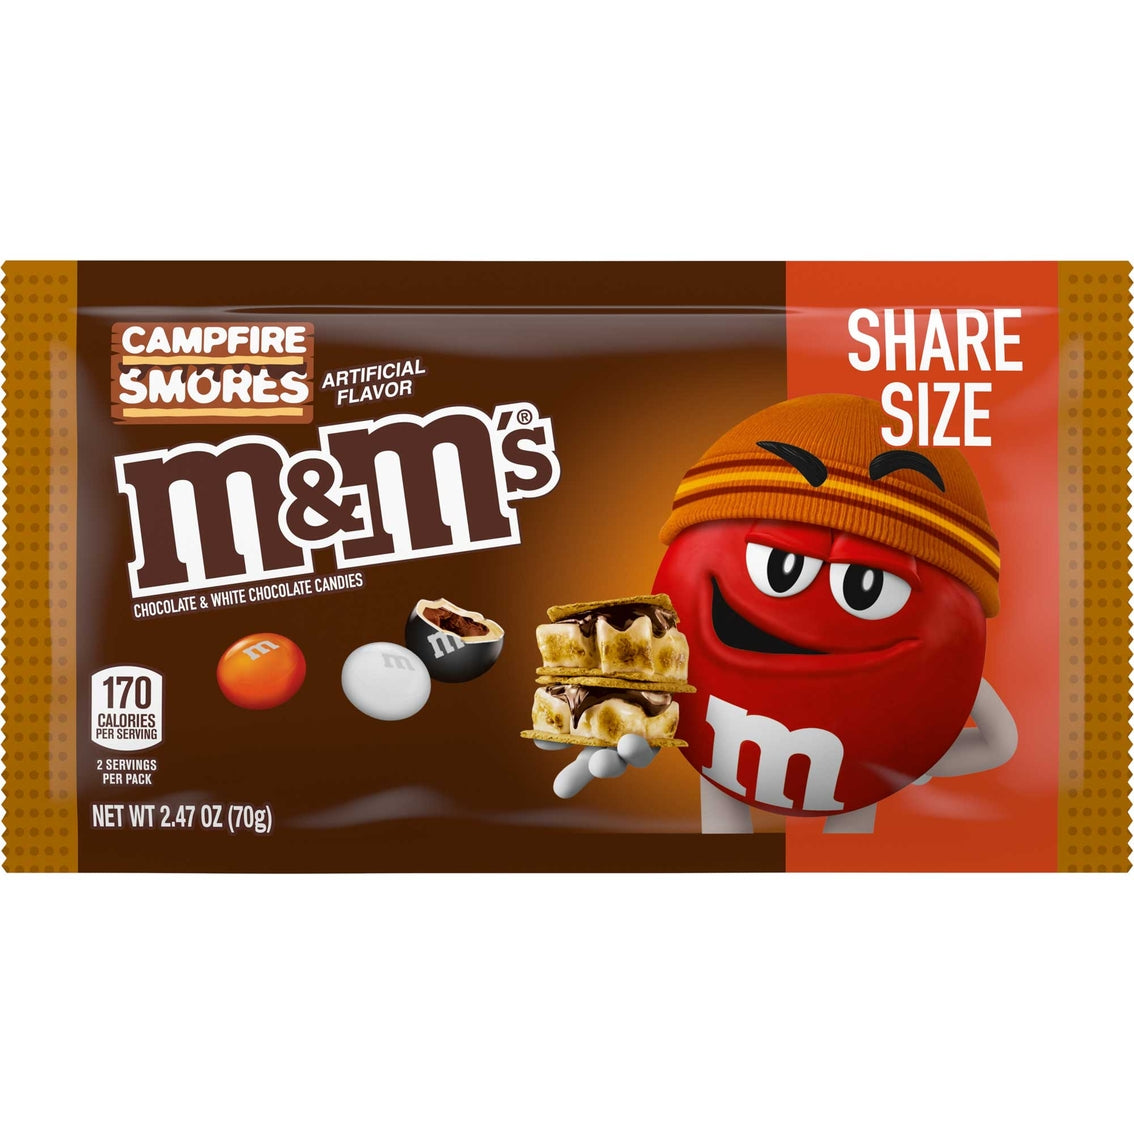 SPOTTED: Campfire S'mores M&M's - The Impulsive Buy